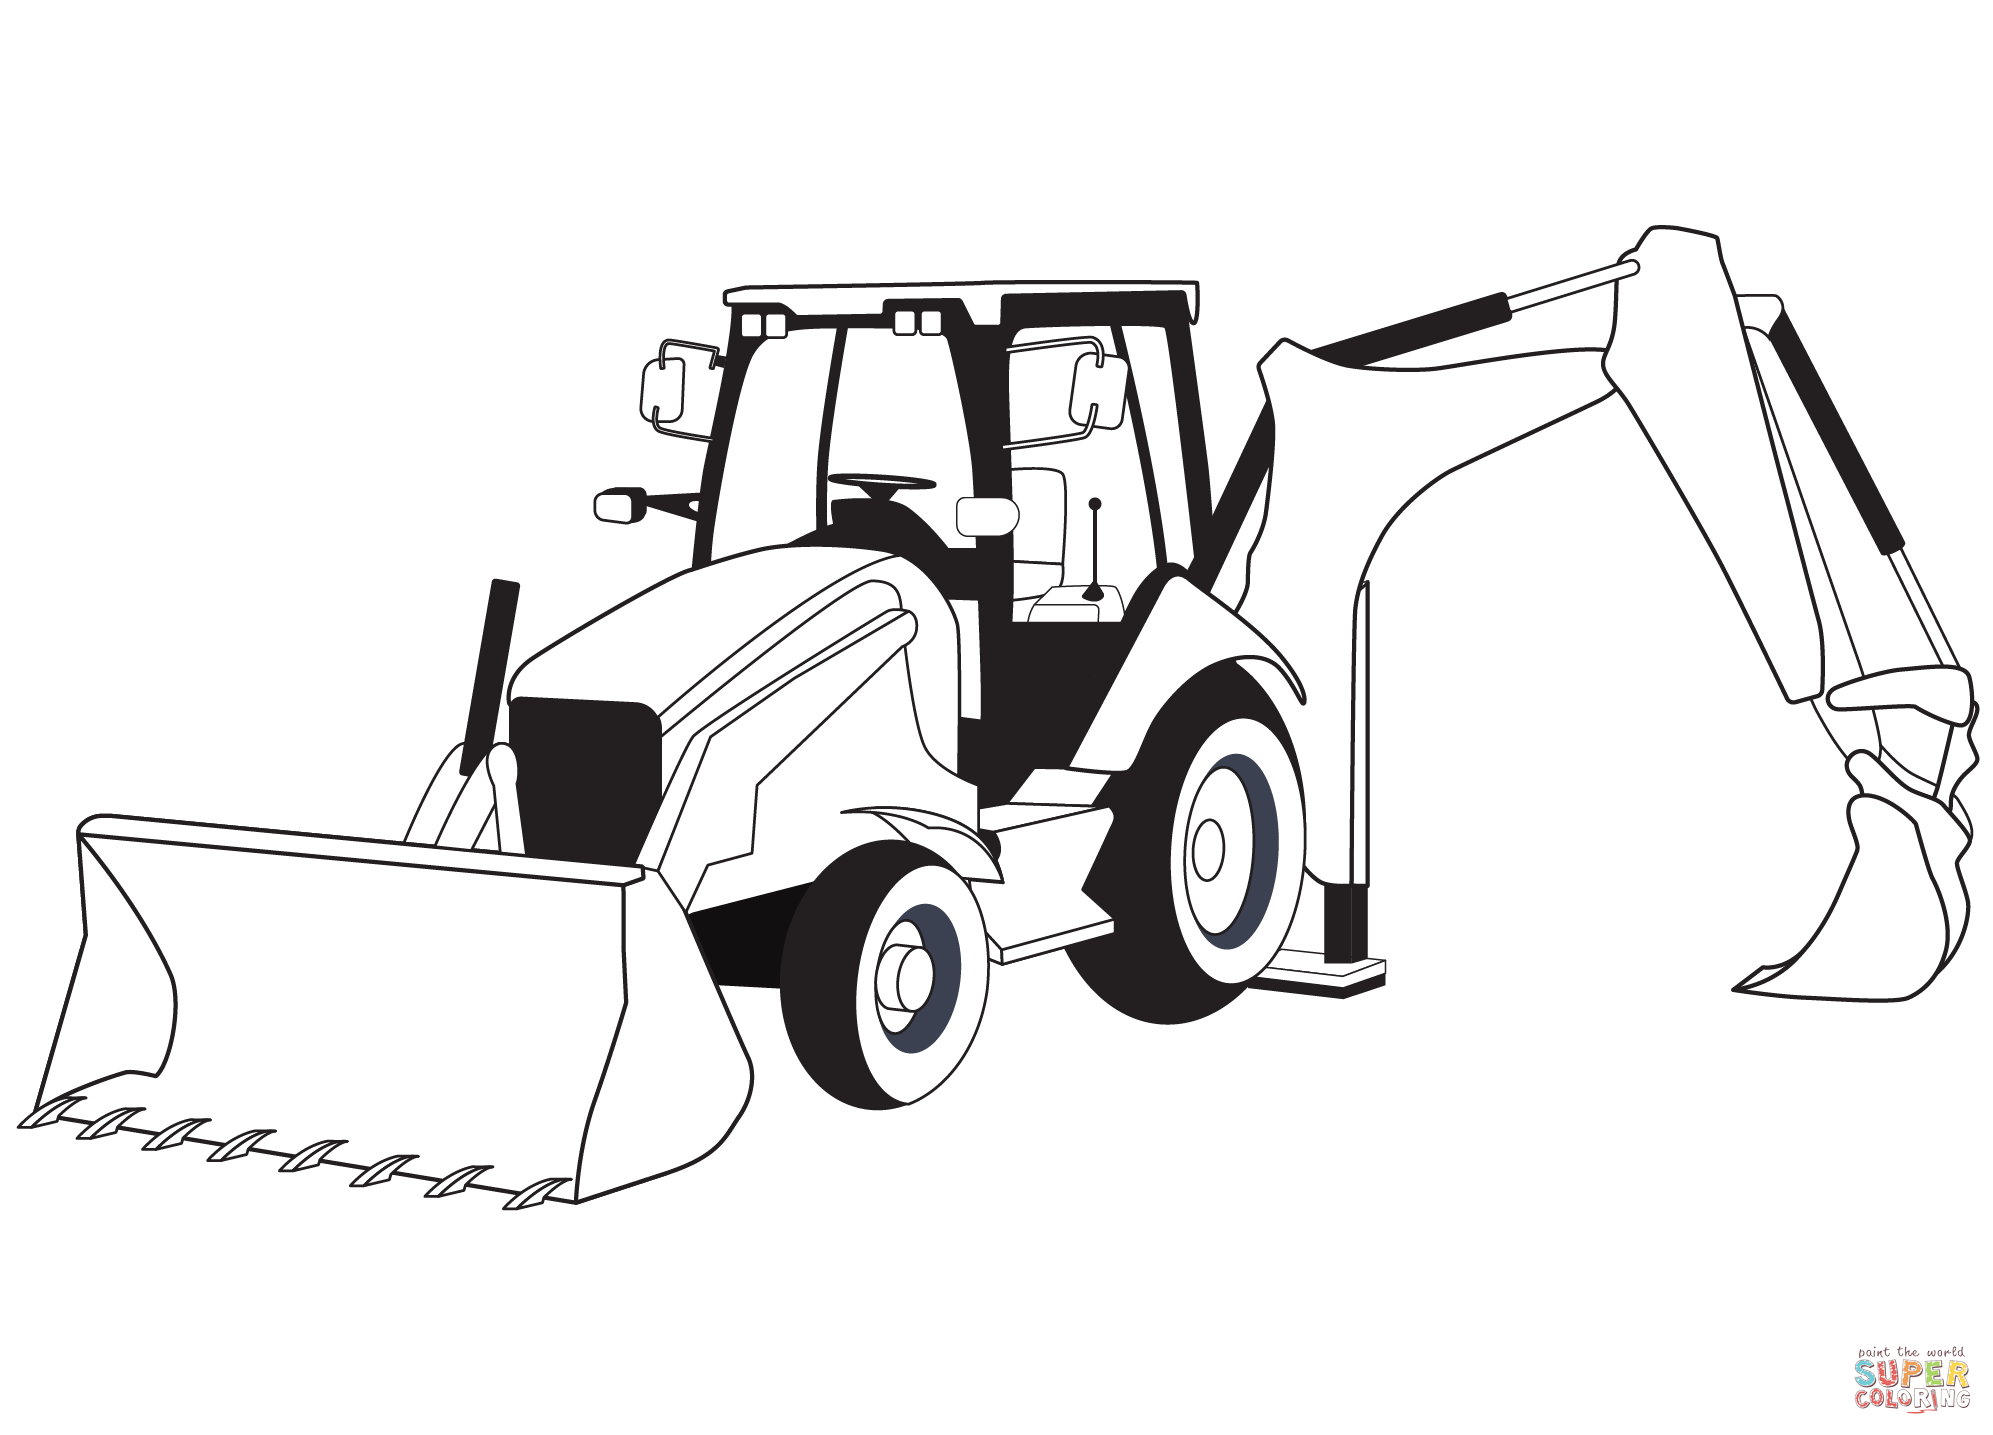 Backhoe Loader coloring page | Free Printable Coloring Pages